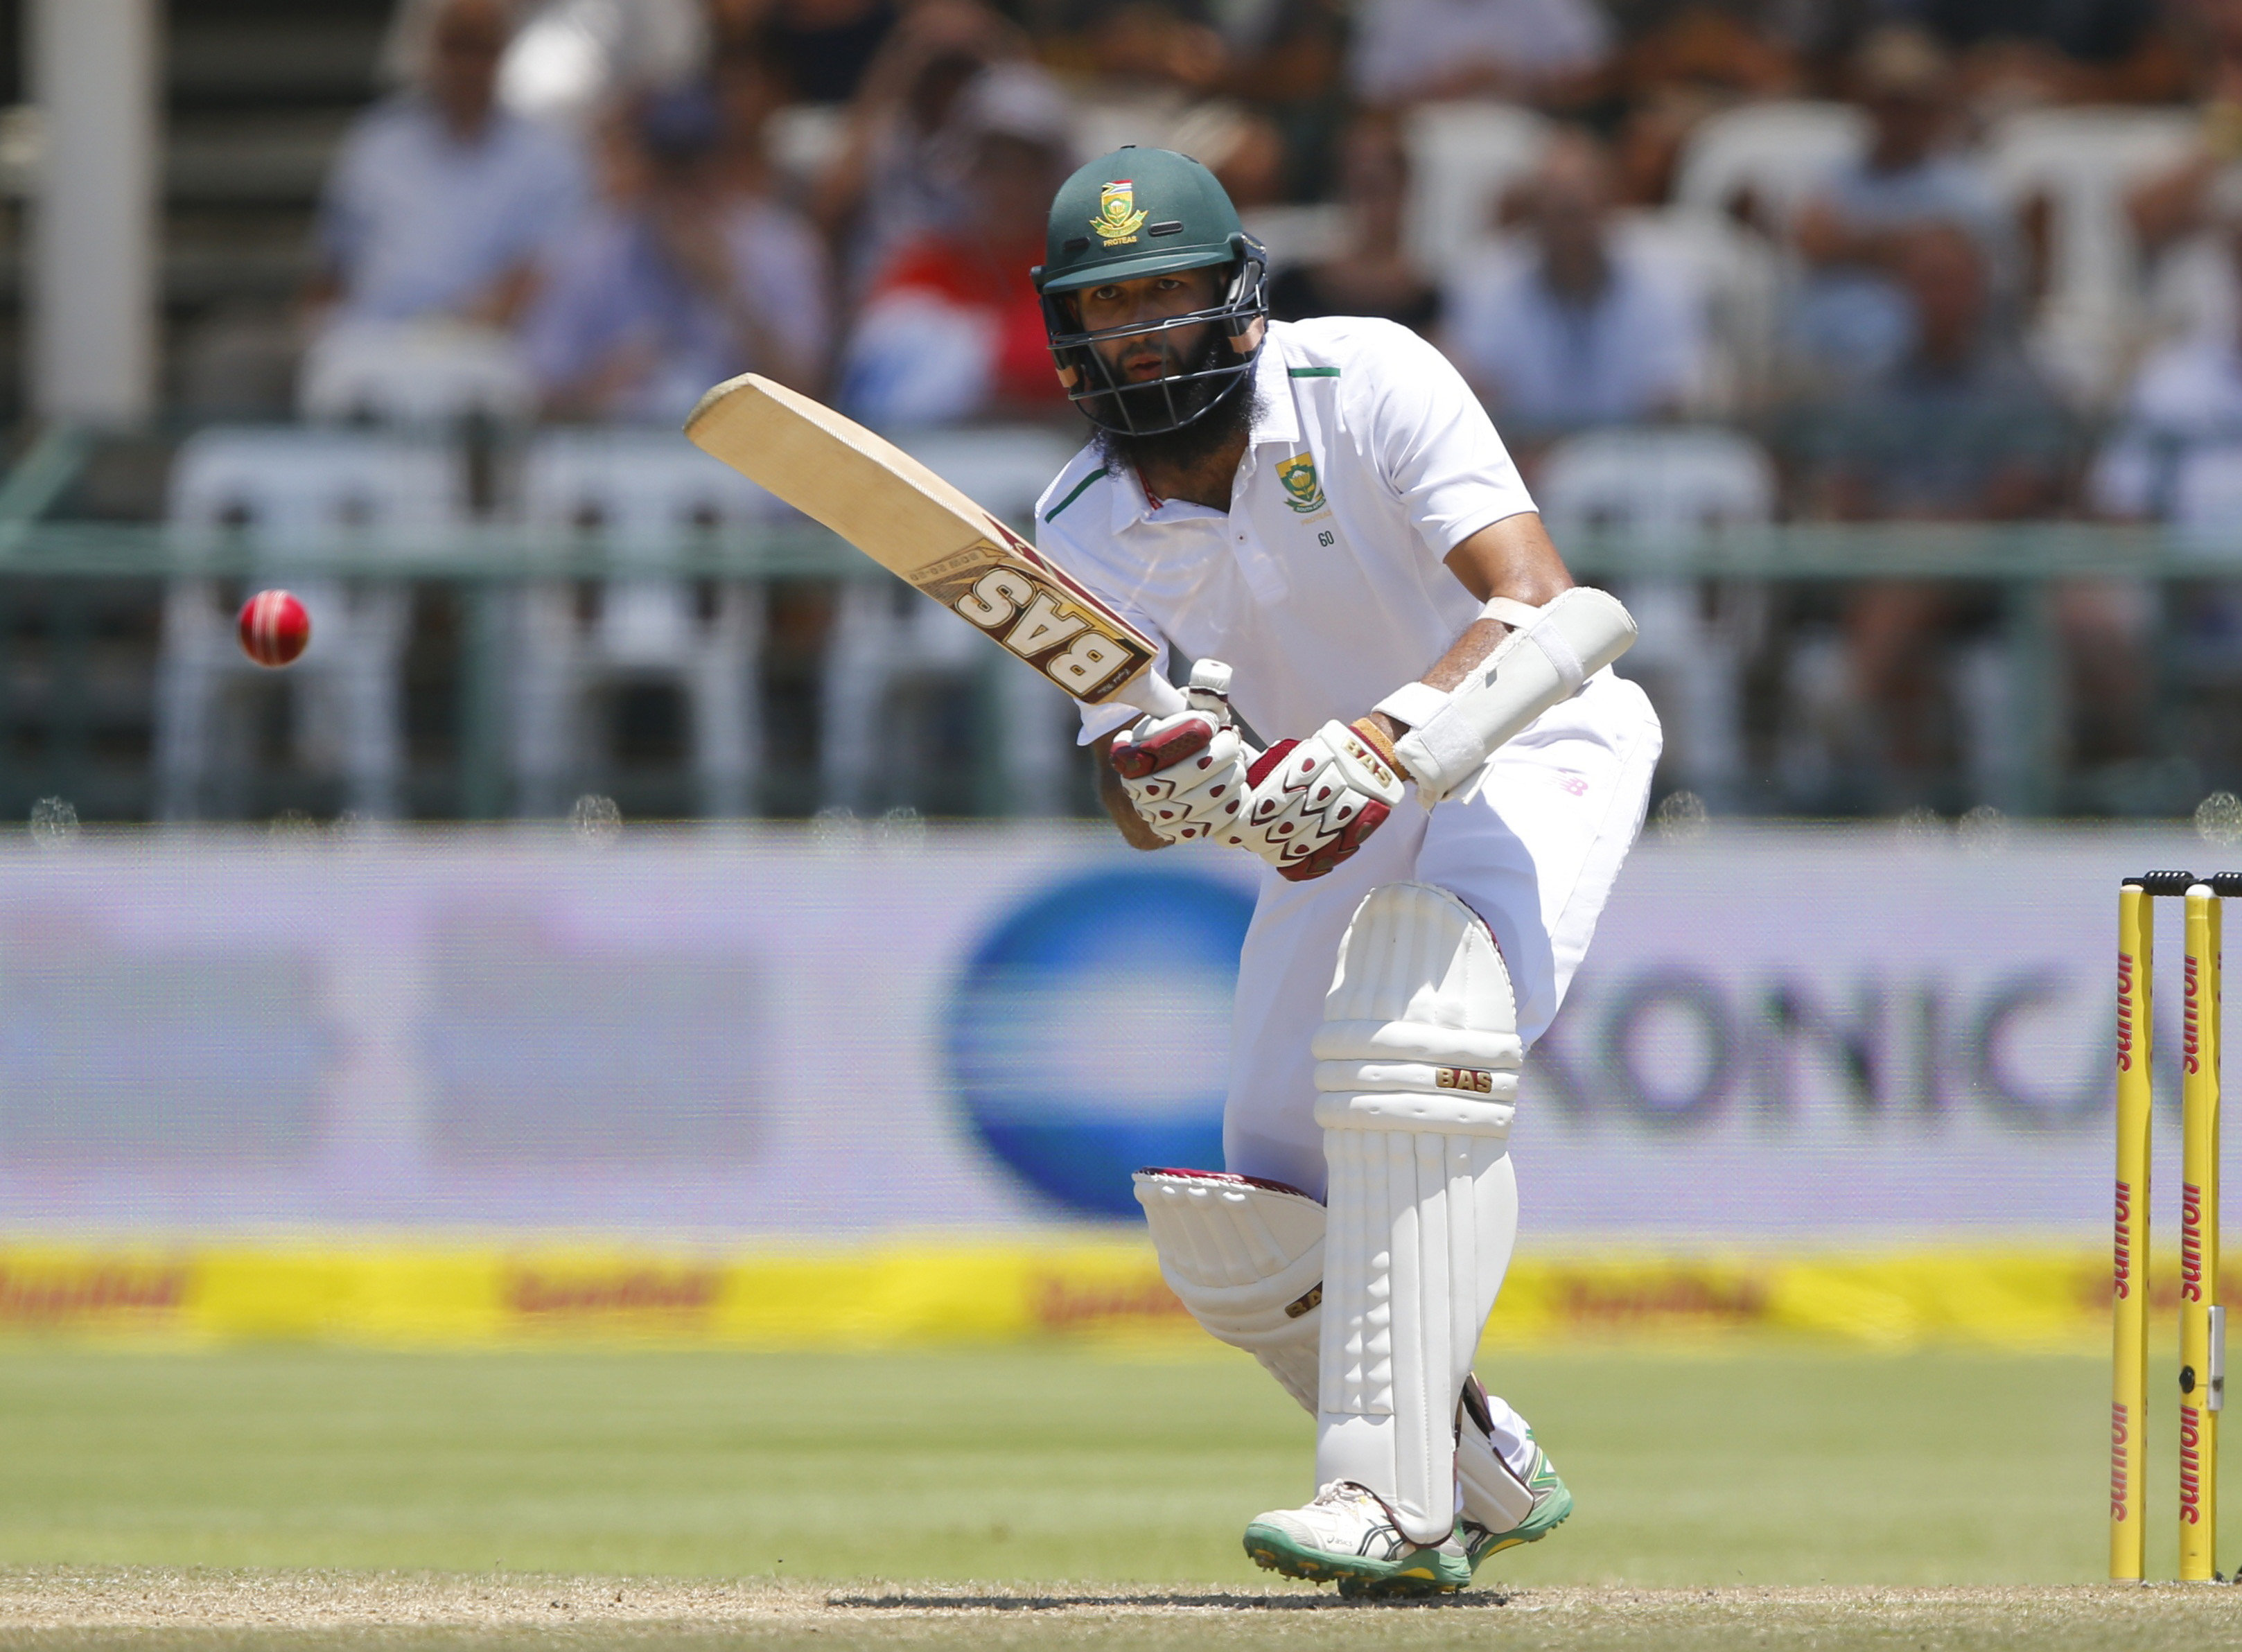 South Africa's Hashim Amla plays a shot during the second cricket test match against England in Cape Town, South Africa, January 4, 2016. Photo: Reuters